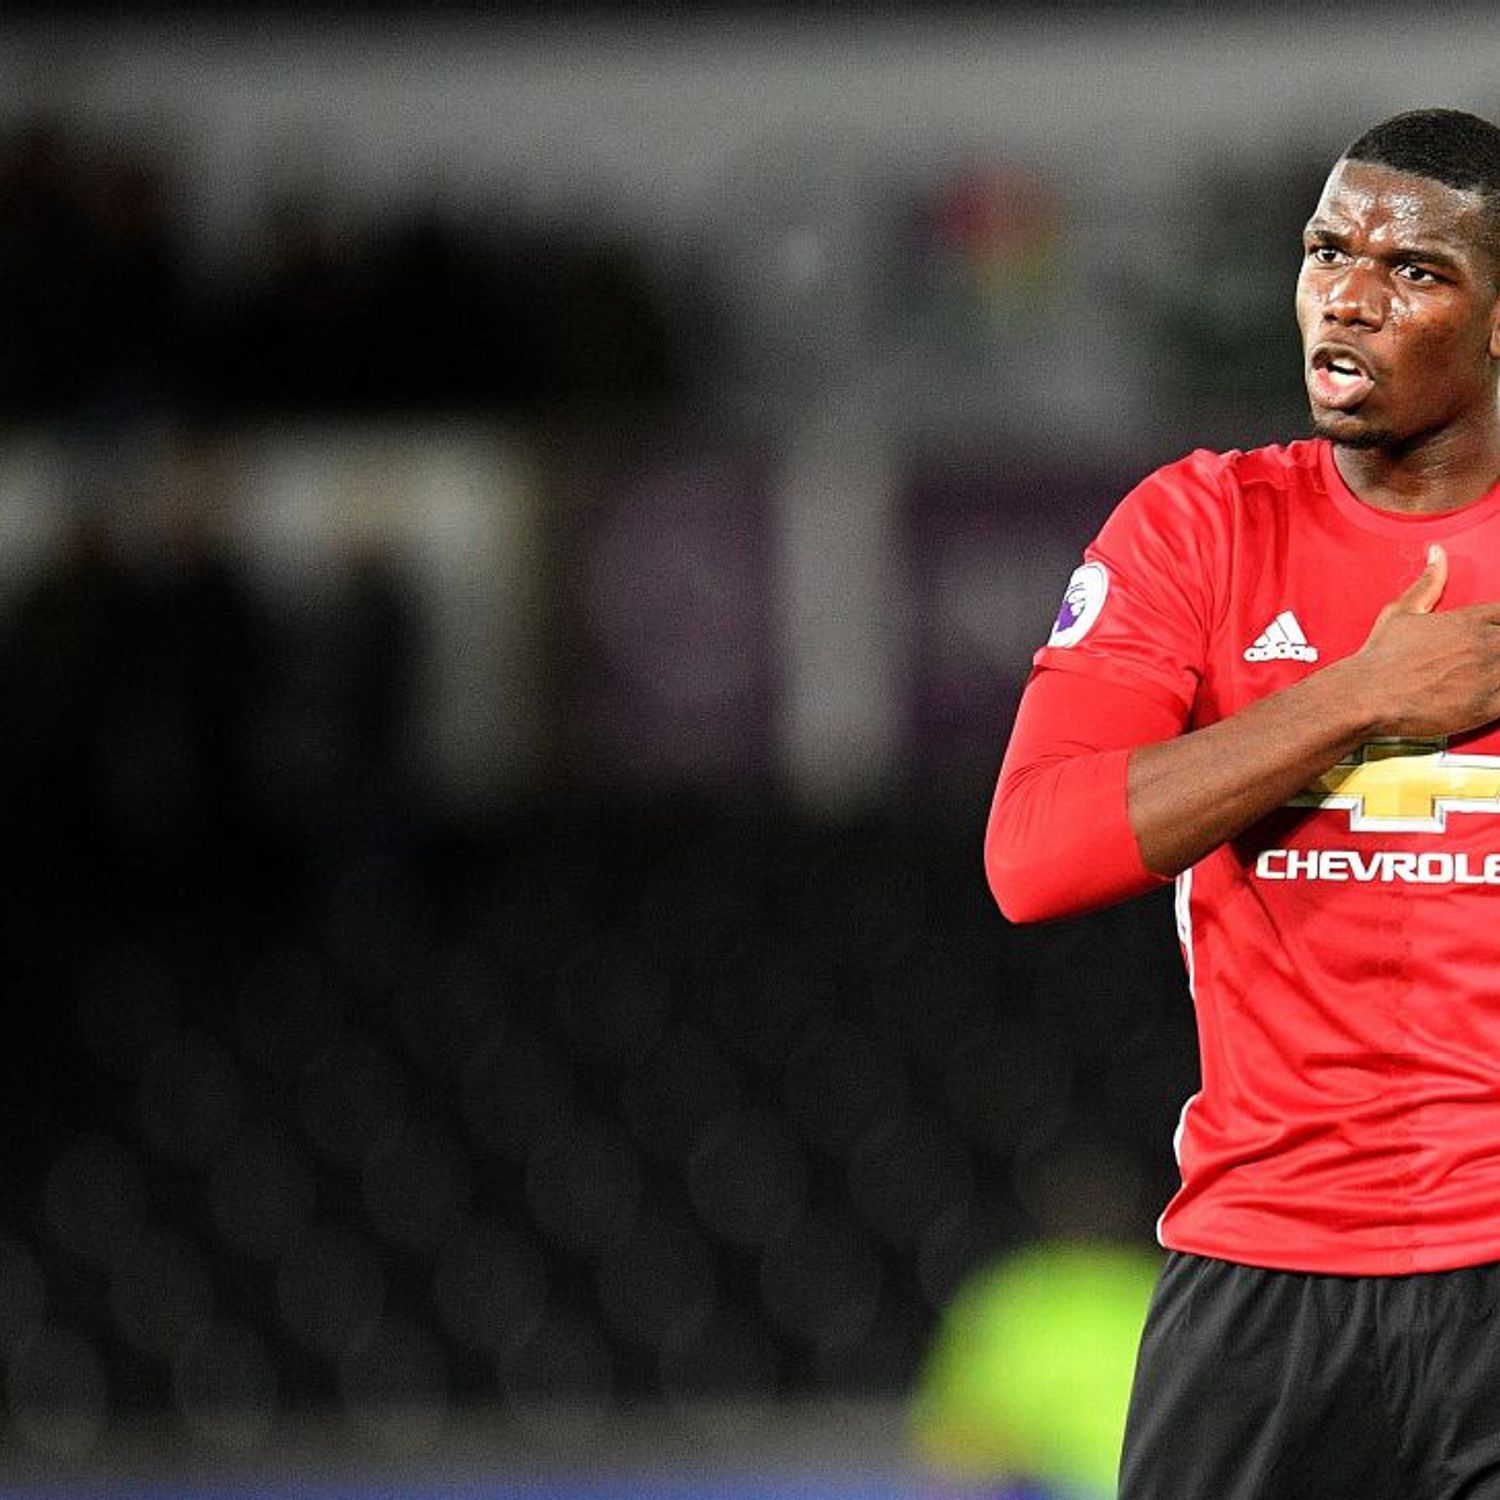 Manchester United must play Paul Pogba in his best position to get the most from him